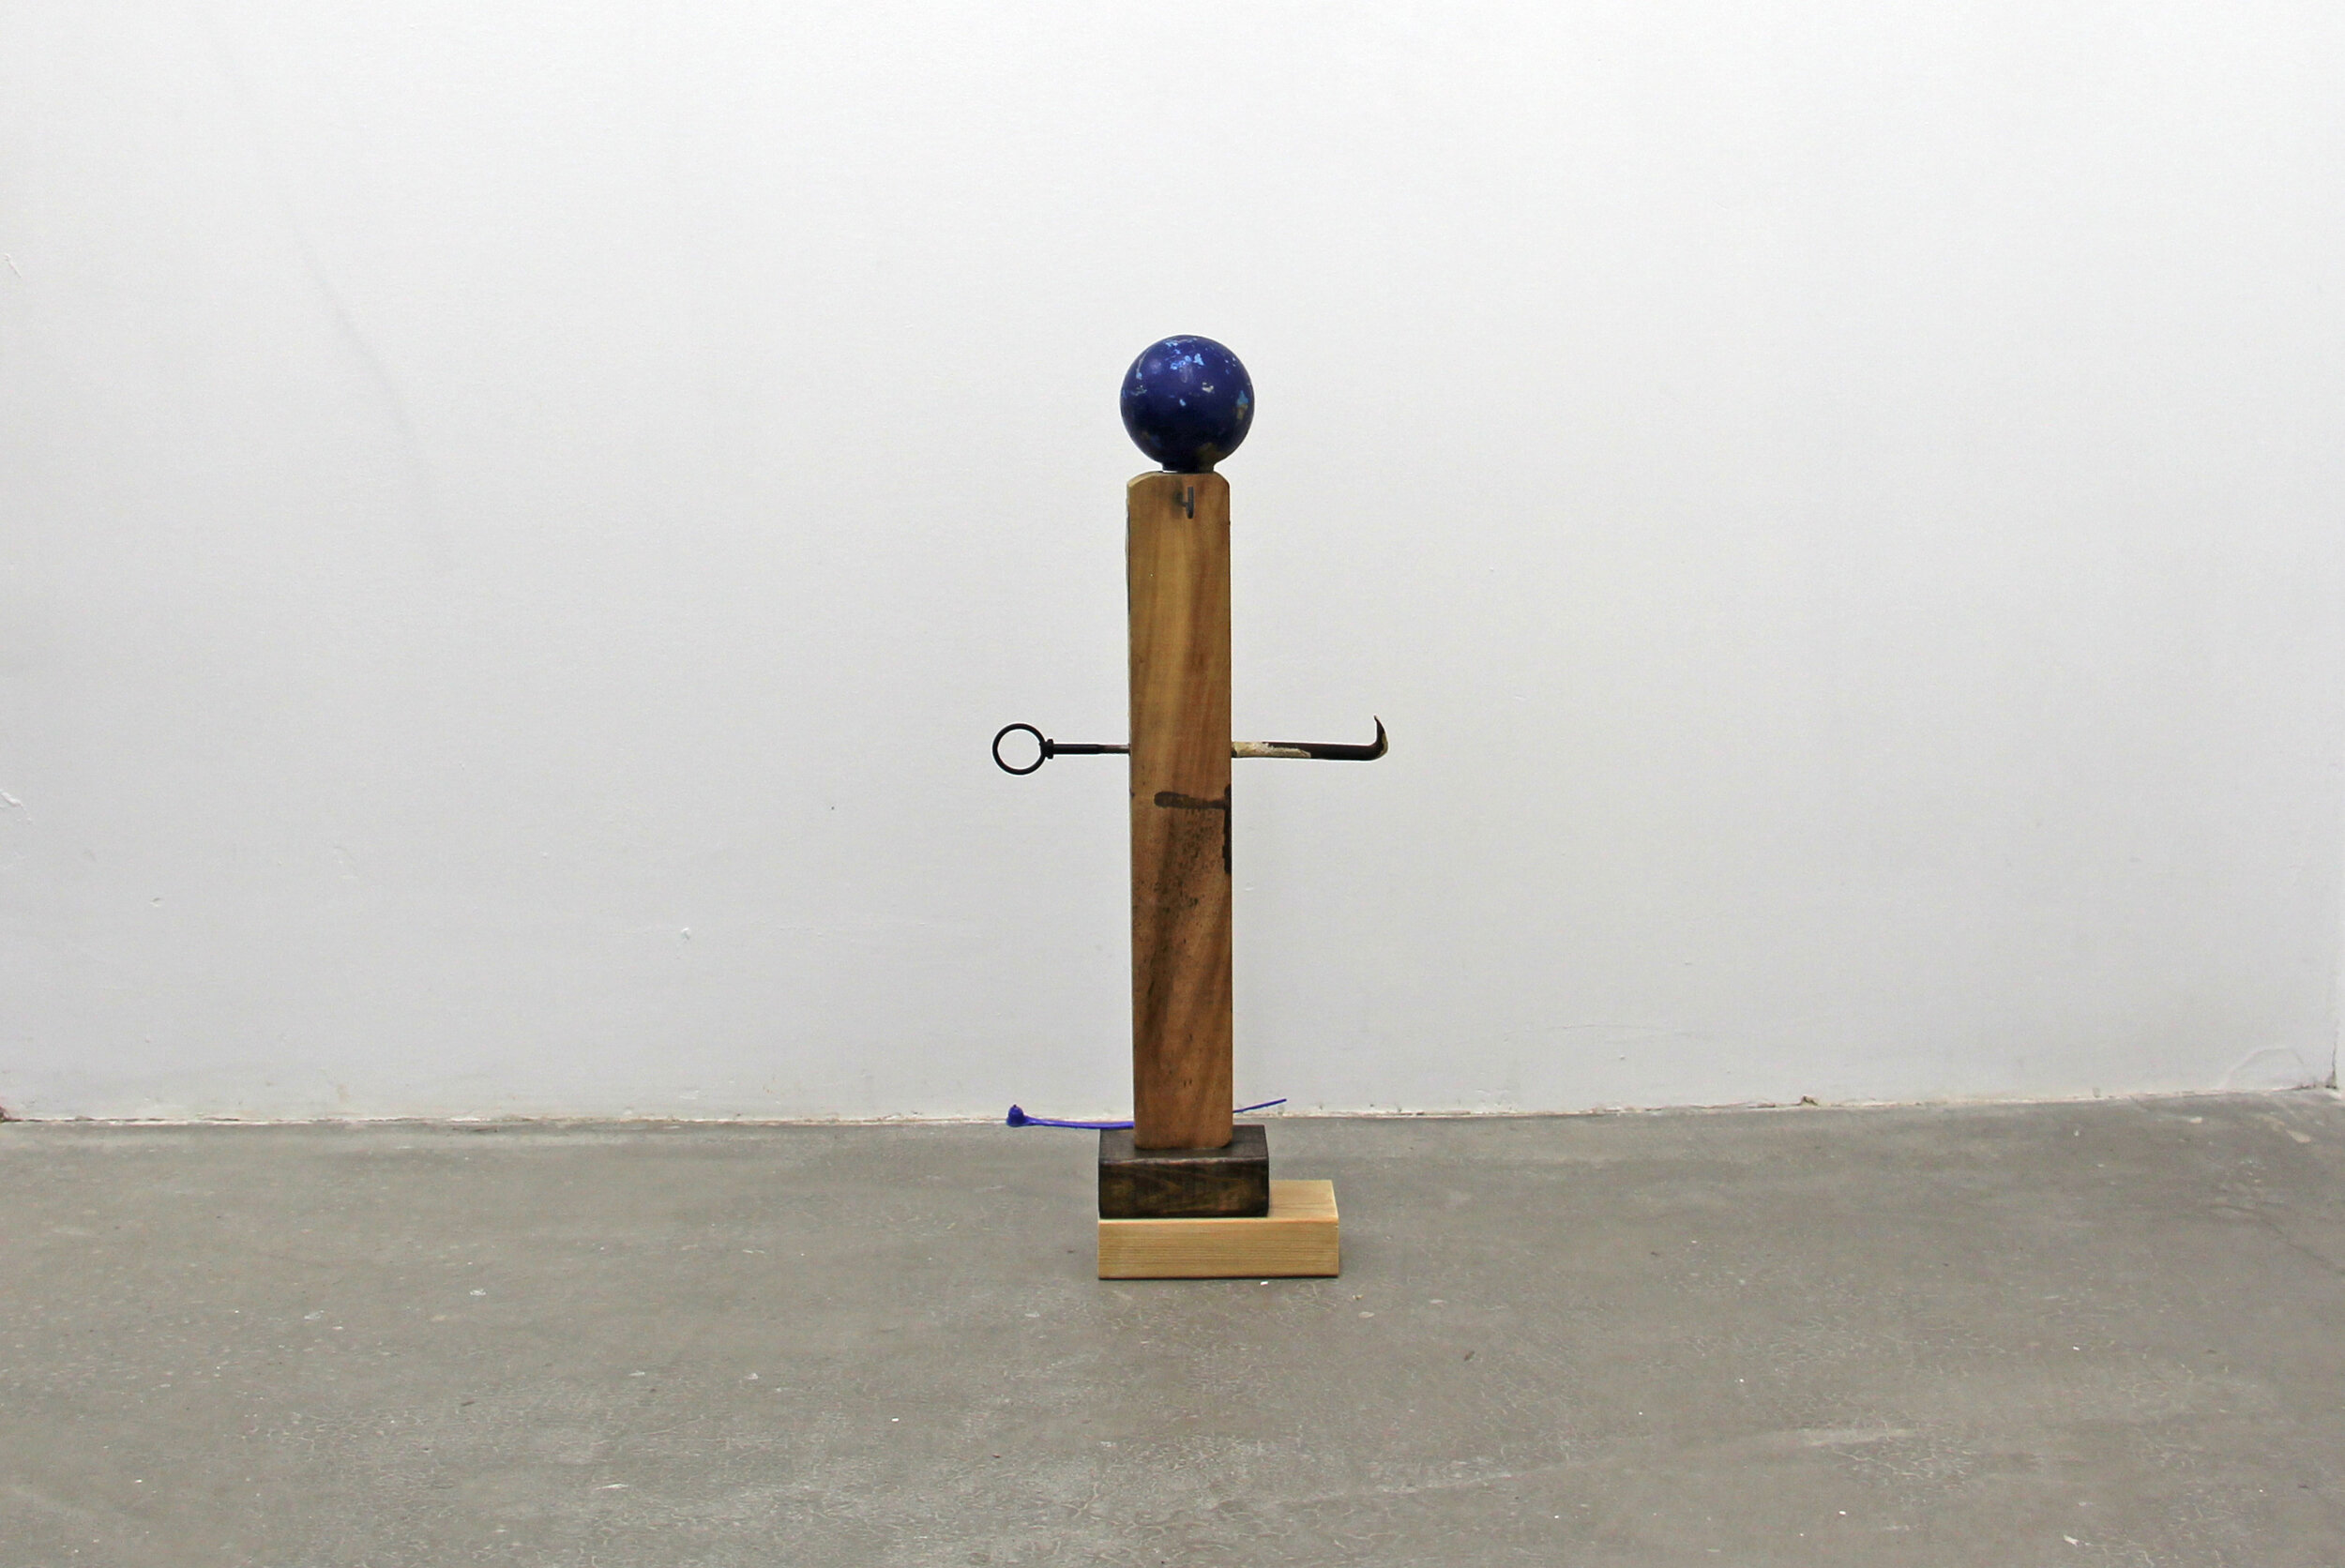  Georgia Dickie,  Missing One , 2020, Found objects and wood stain on wood base 23 x 9.5 x 5.25 in (58.4 x 24.1 x 13.3 cm)  